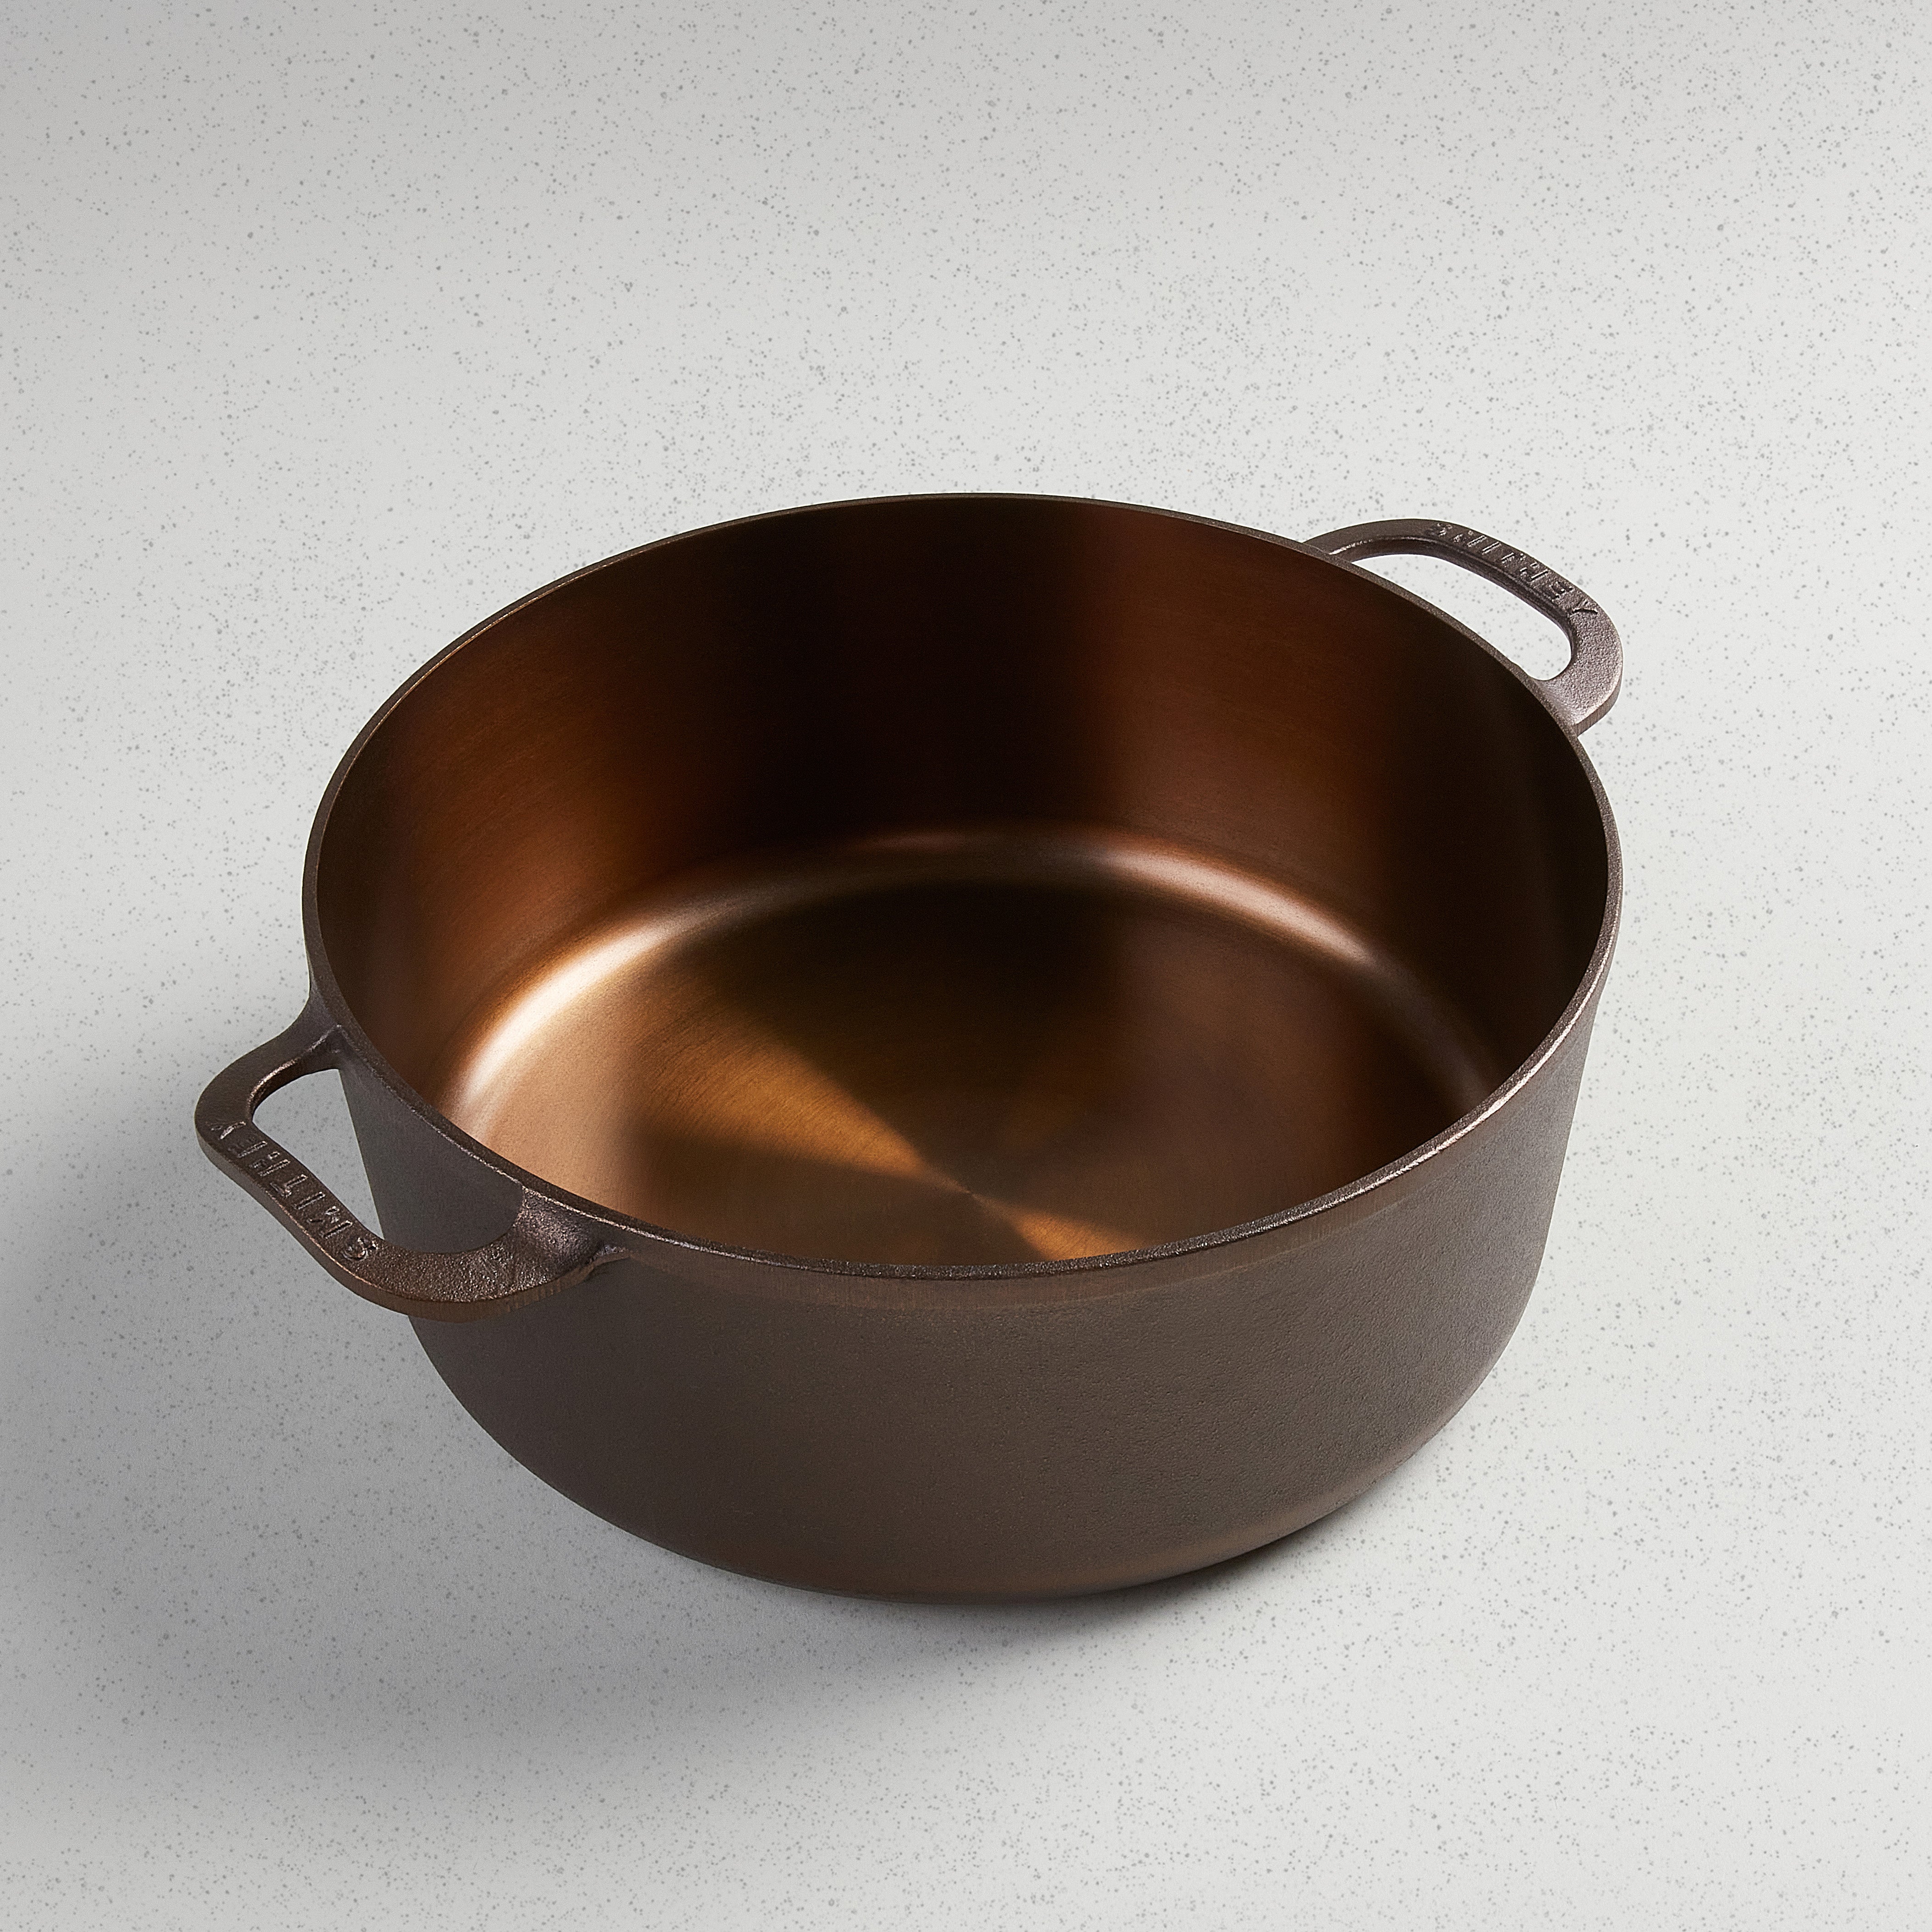 Kitchen Pans from Copper-Bottom Pan to Dutch Oven